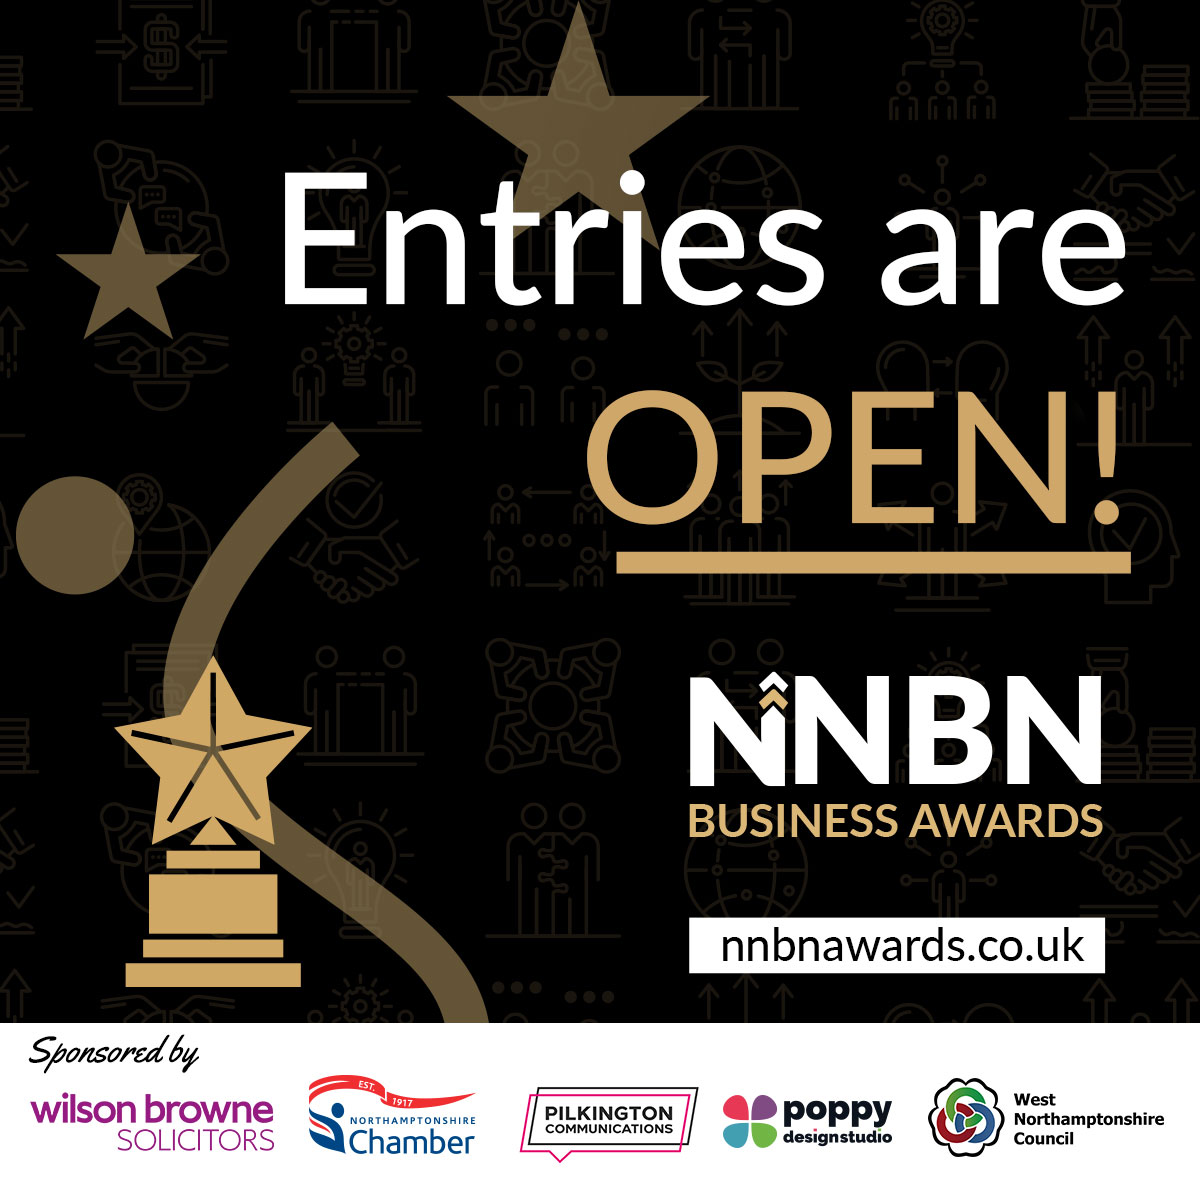 Entries are open for this year's NNBN Awards celebrating businesses, charities, organisations and individuals across Northamptonshire. There are 14 categories to enter this year and entries close on 30th June at MIDDAY. To enter, visit zurl.co/2Sha